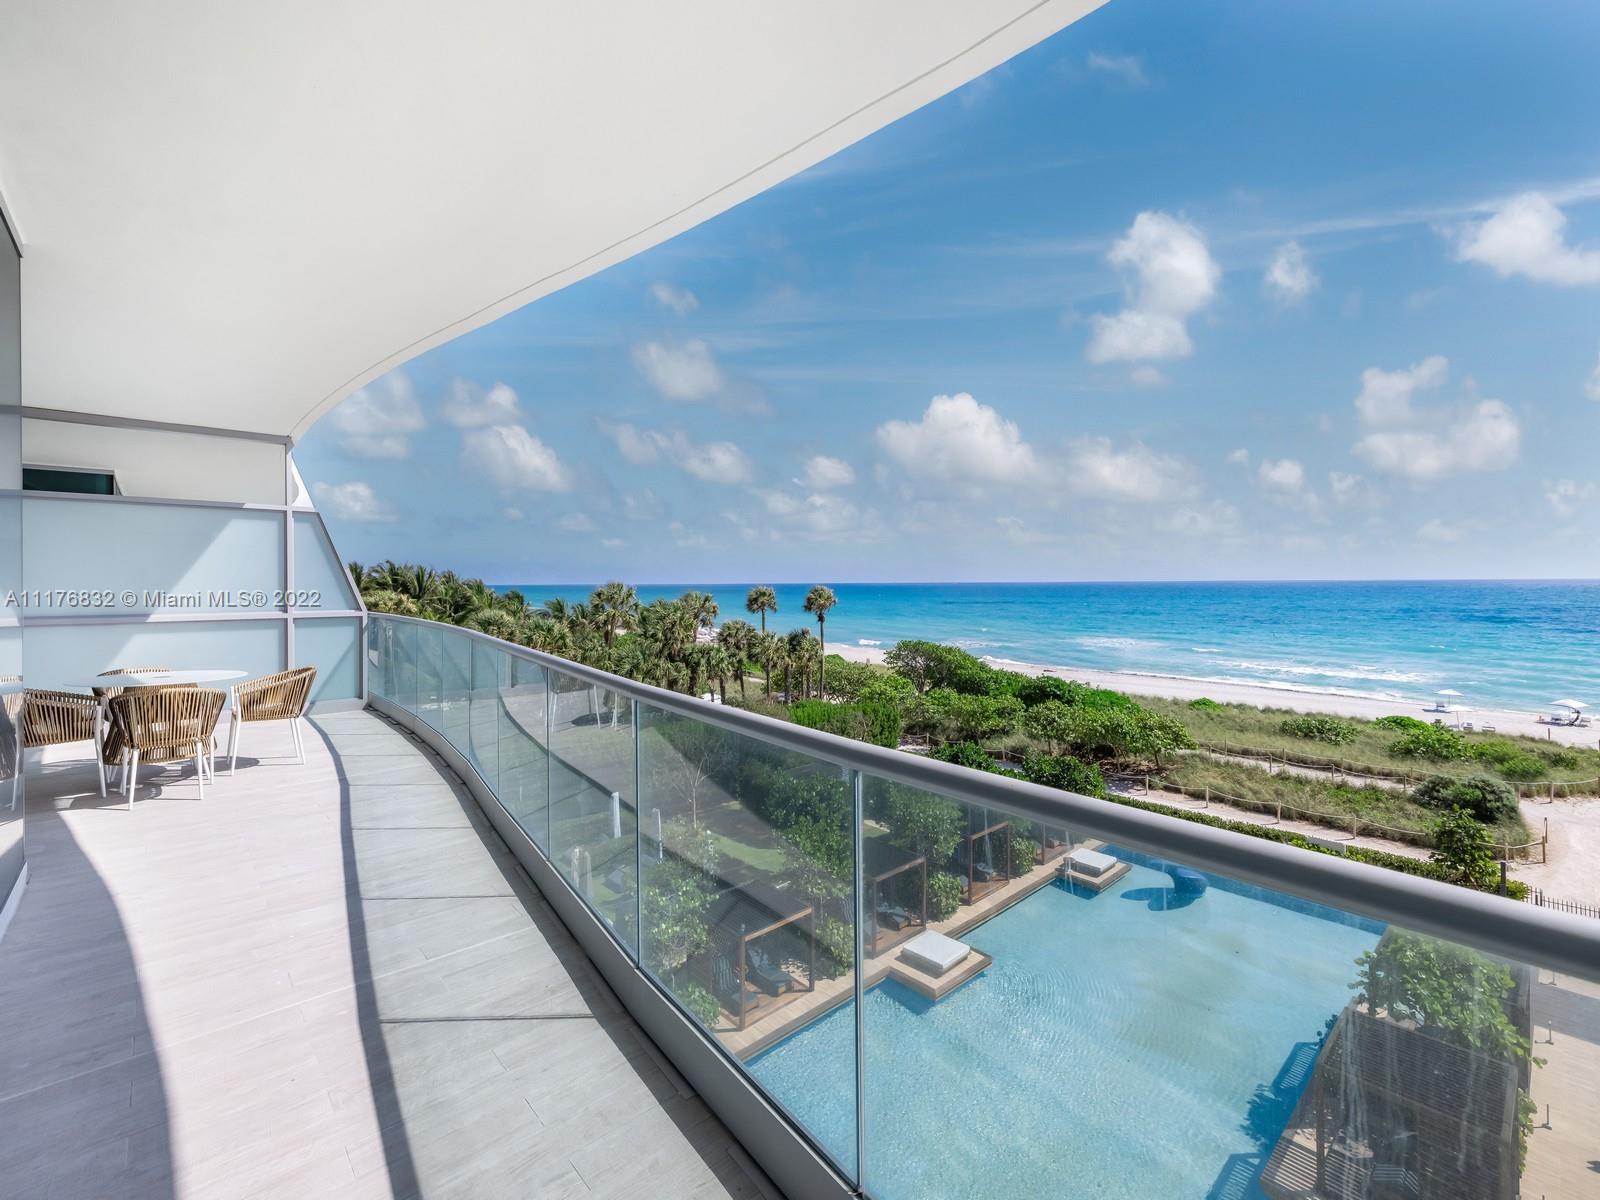 Fabulous turn-key beach front condo in the highly sought after Fendi Chateau. Spectacular direct oce